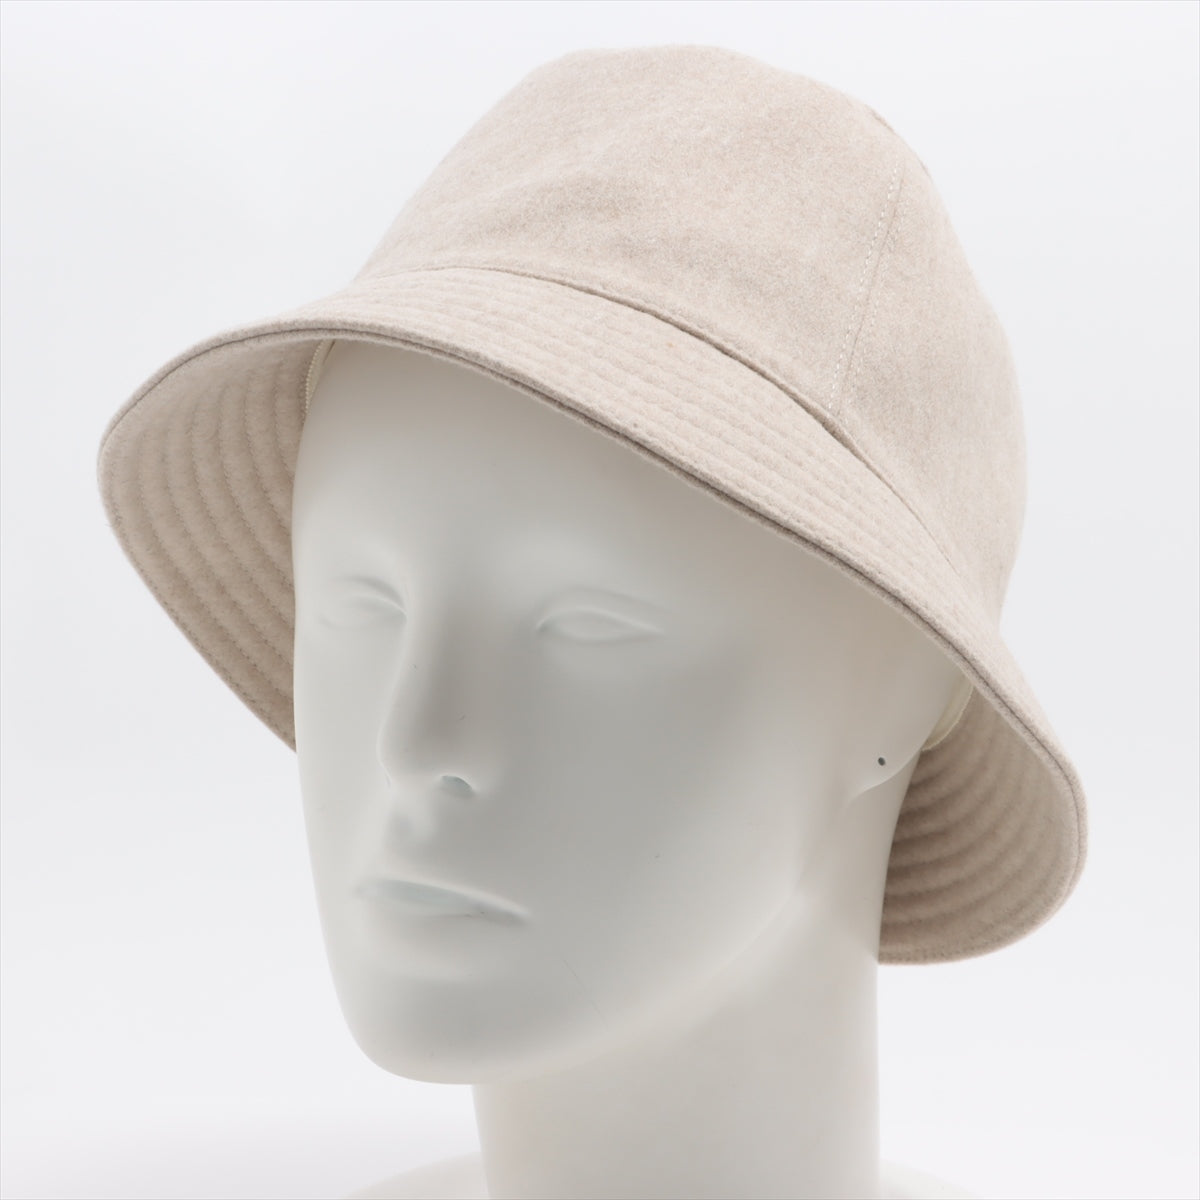 Hermès Serie Hat 56 Cashmere Beige Wears Stains Stained